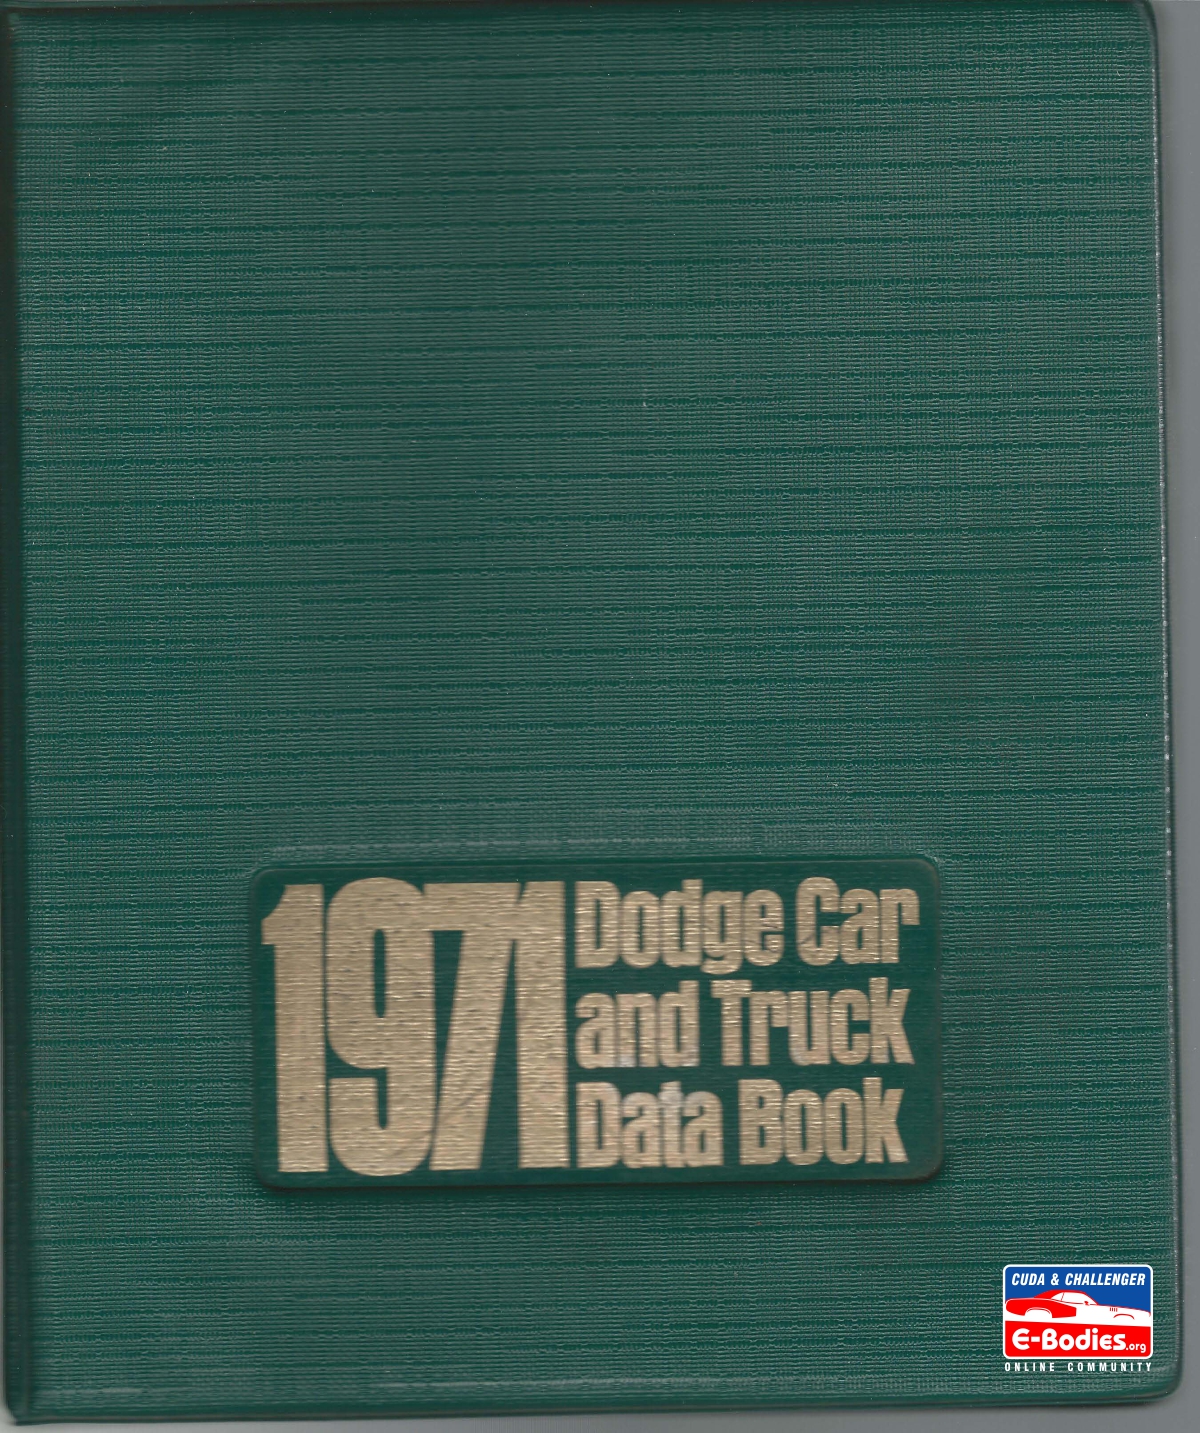 Attached picture 1971 Dodge Data Cover1.jpg